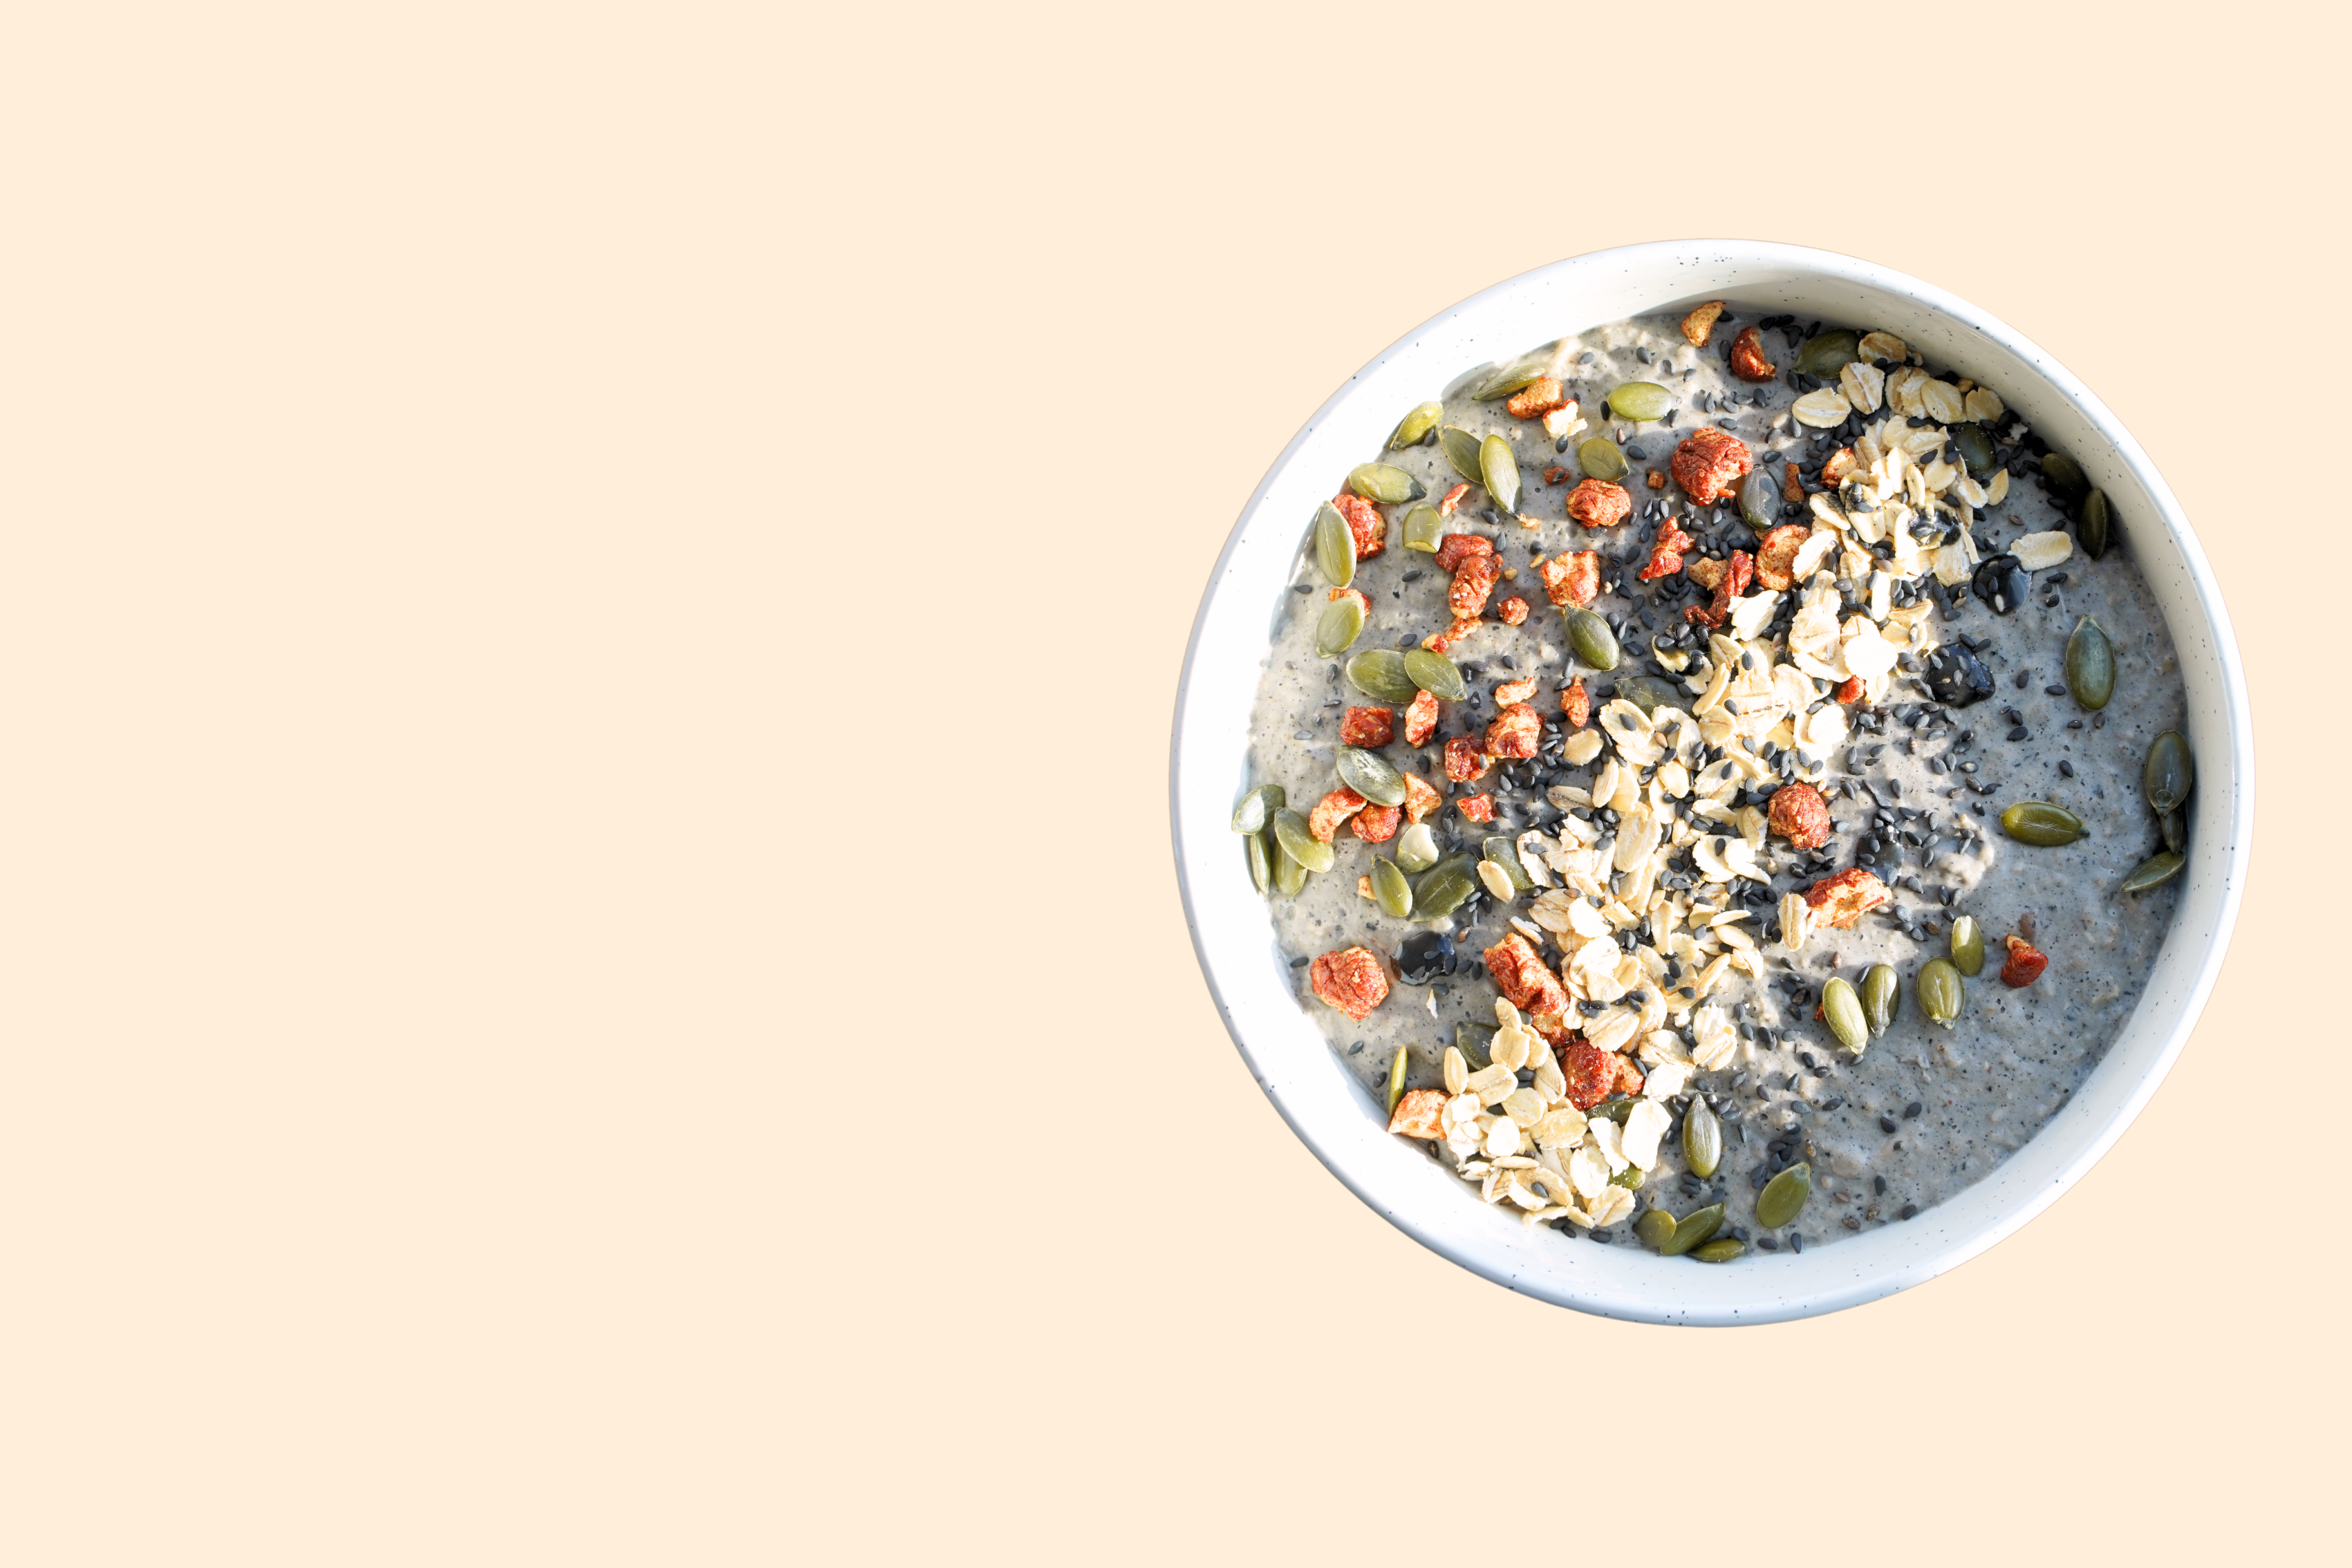 Toasted Black Sesame Superfood Overnight Oats - rich, nutty flavour with a deep, dark sesame appearance